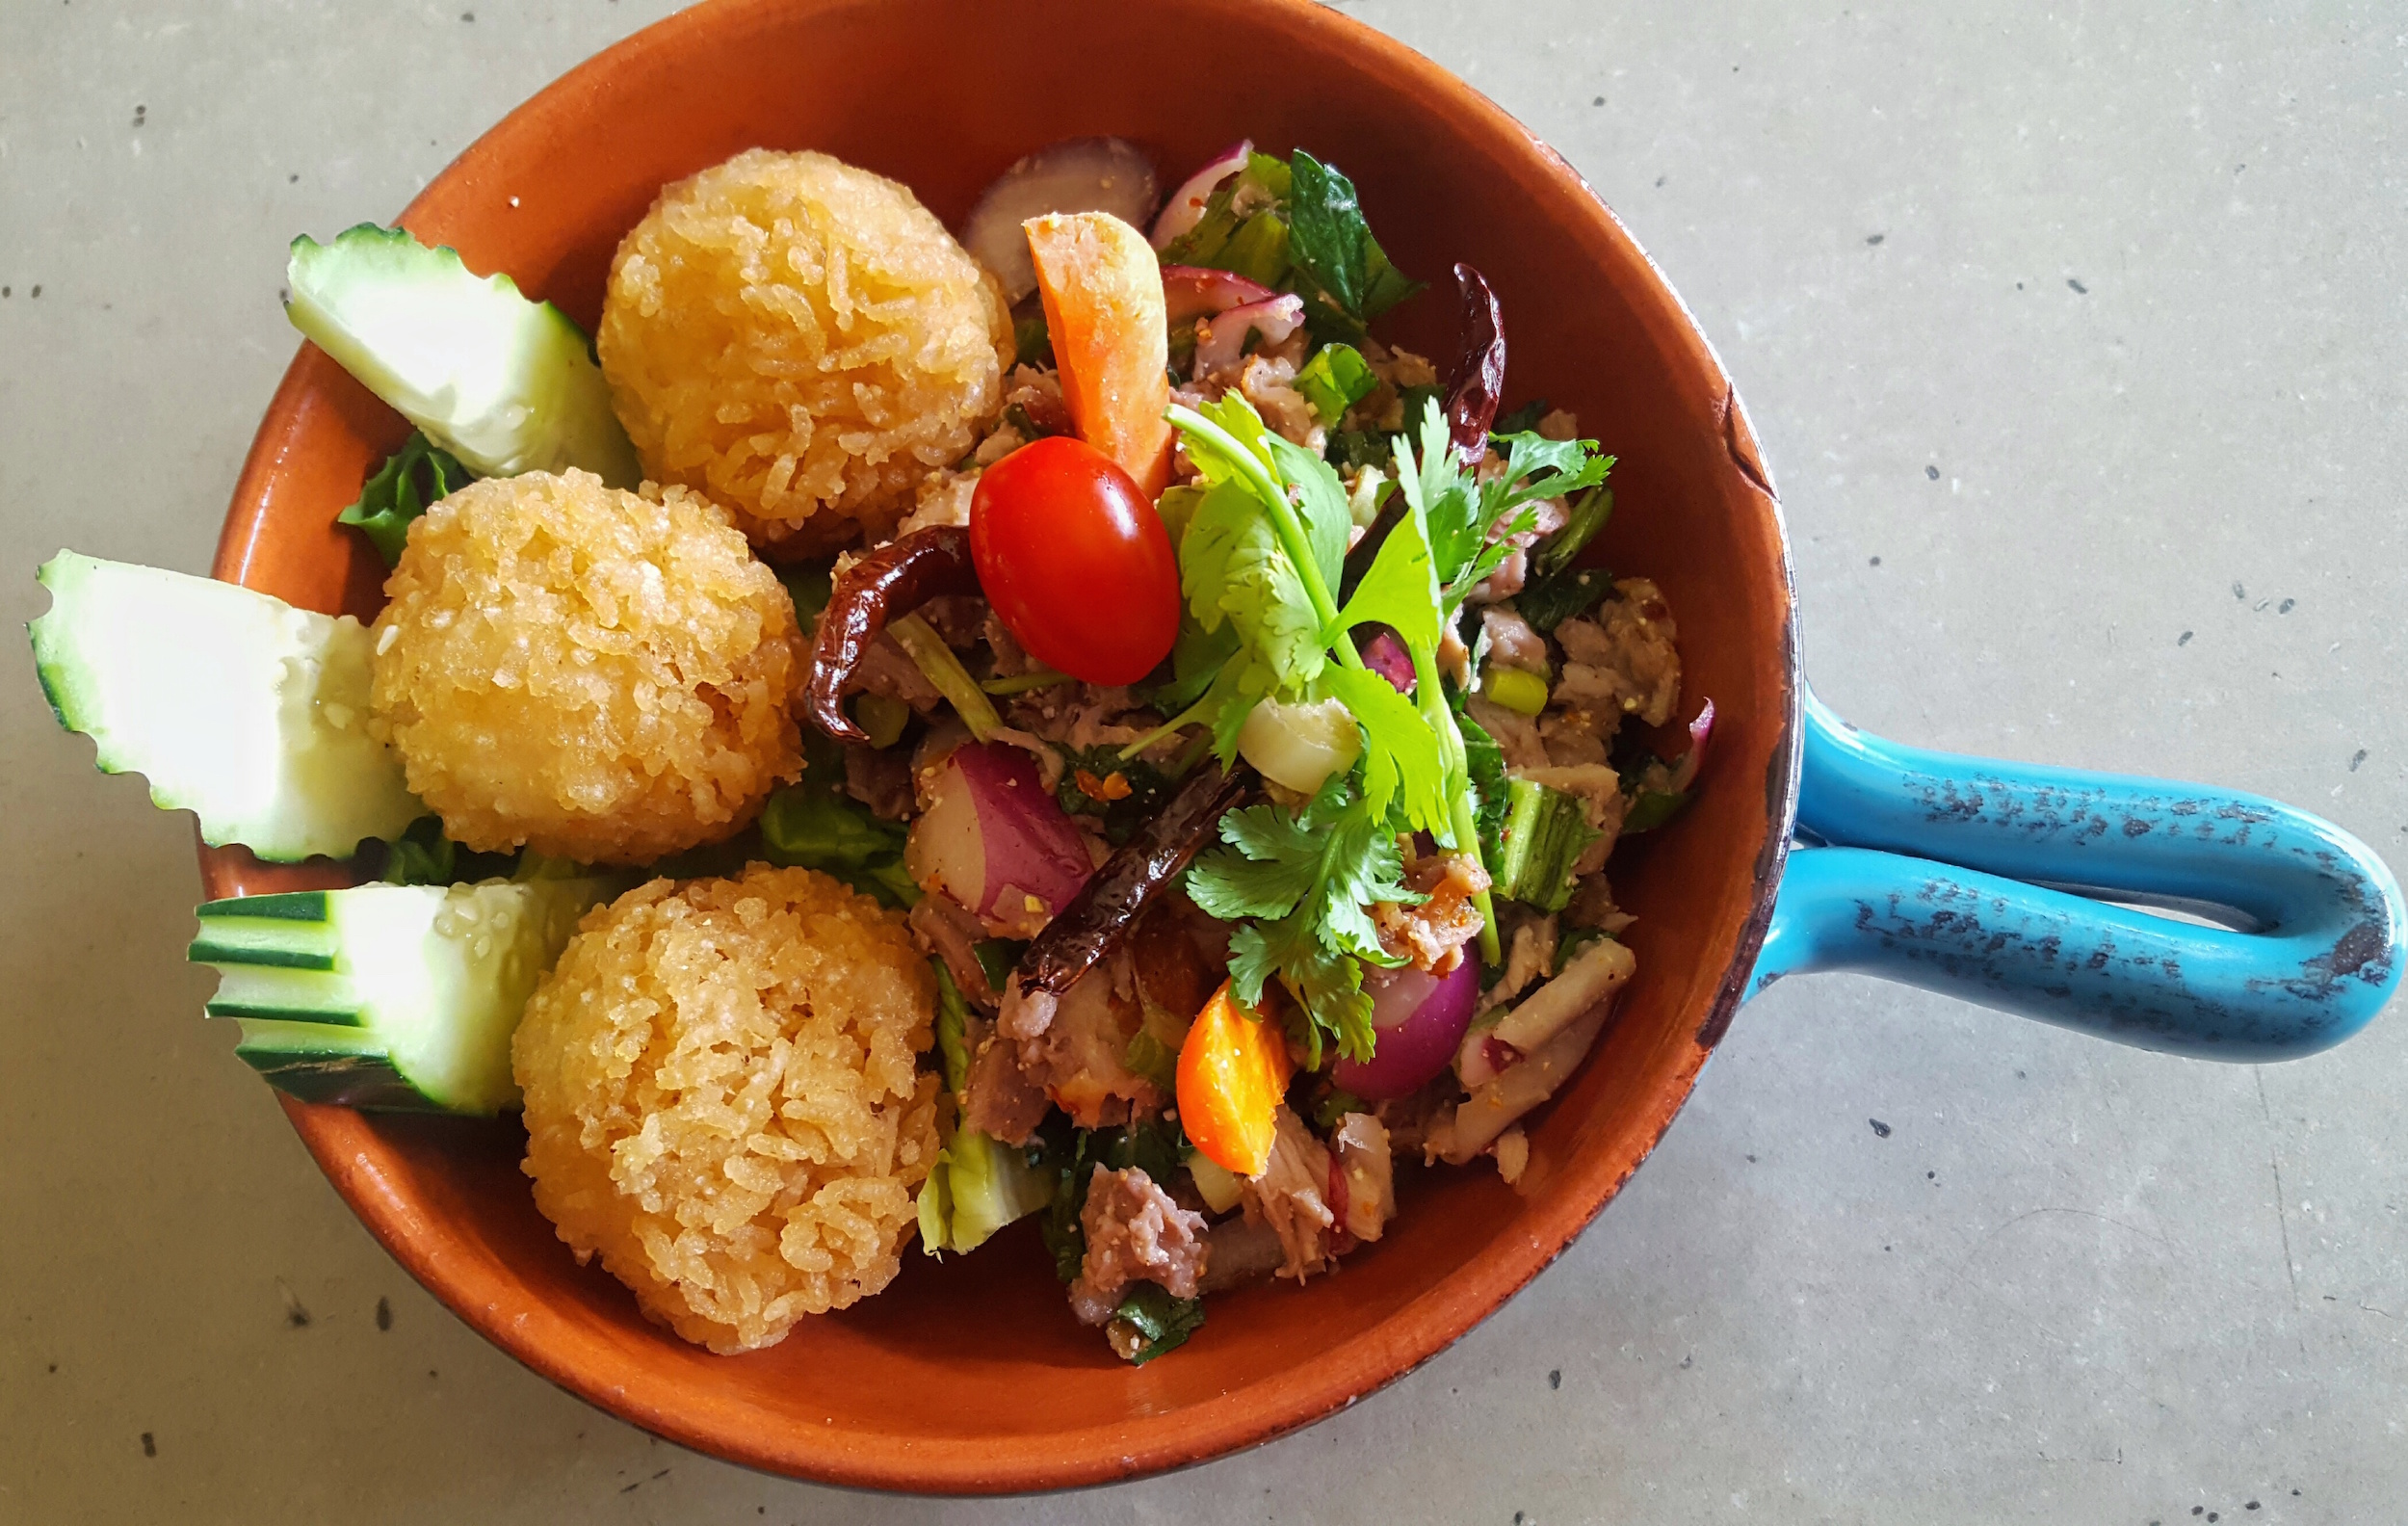 Find Thai arancini and duck at this Woodside spot.